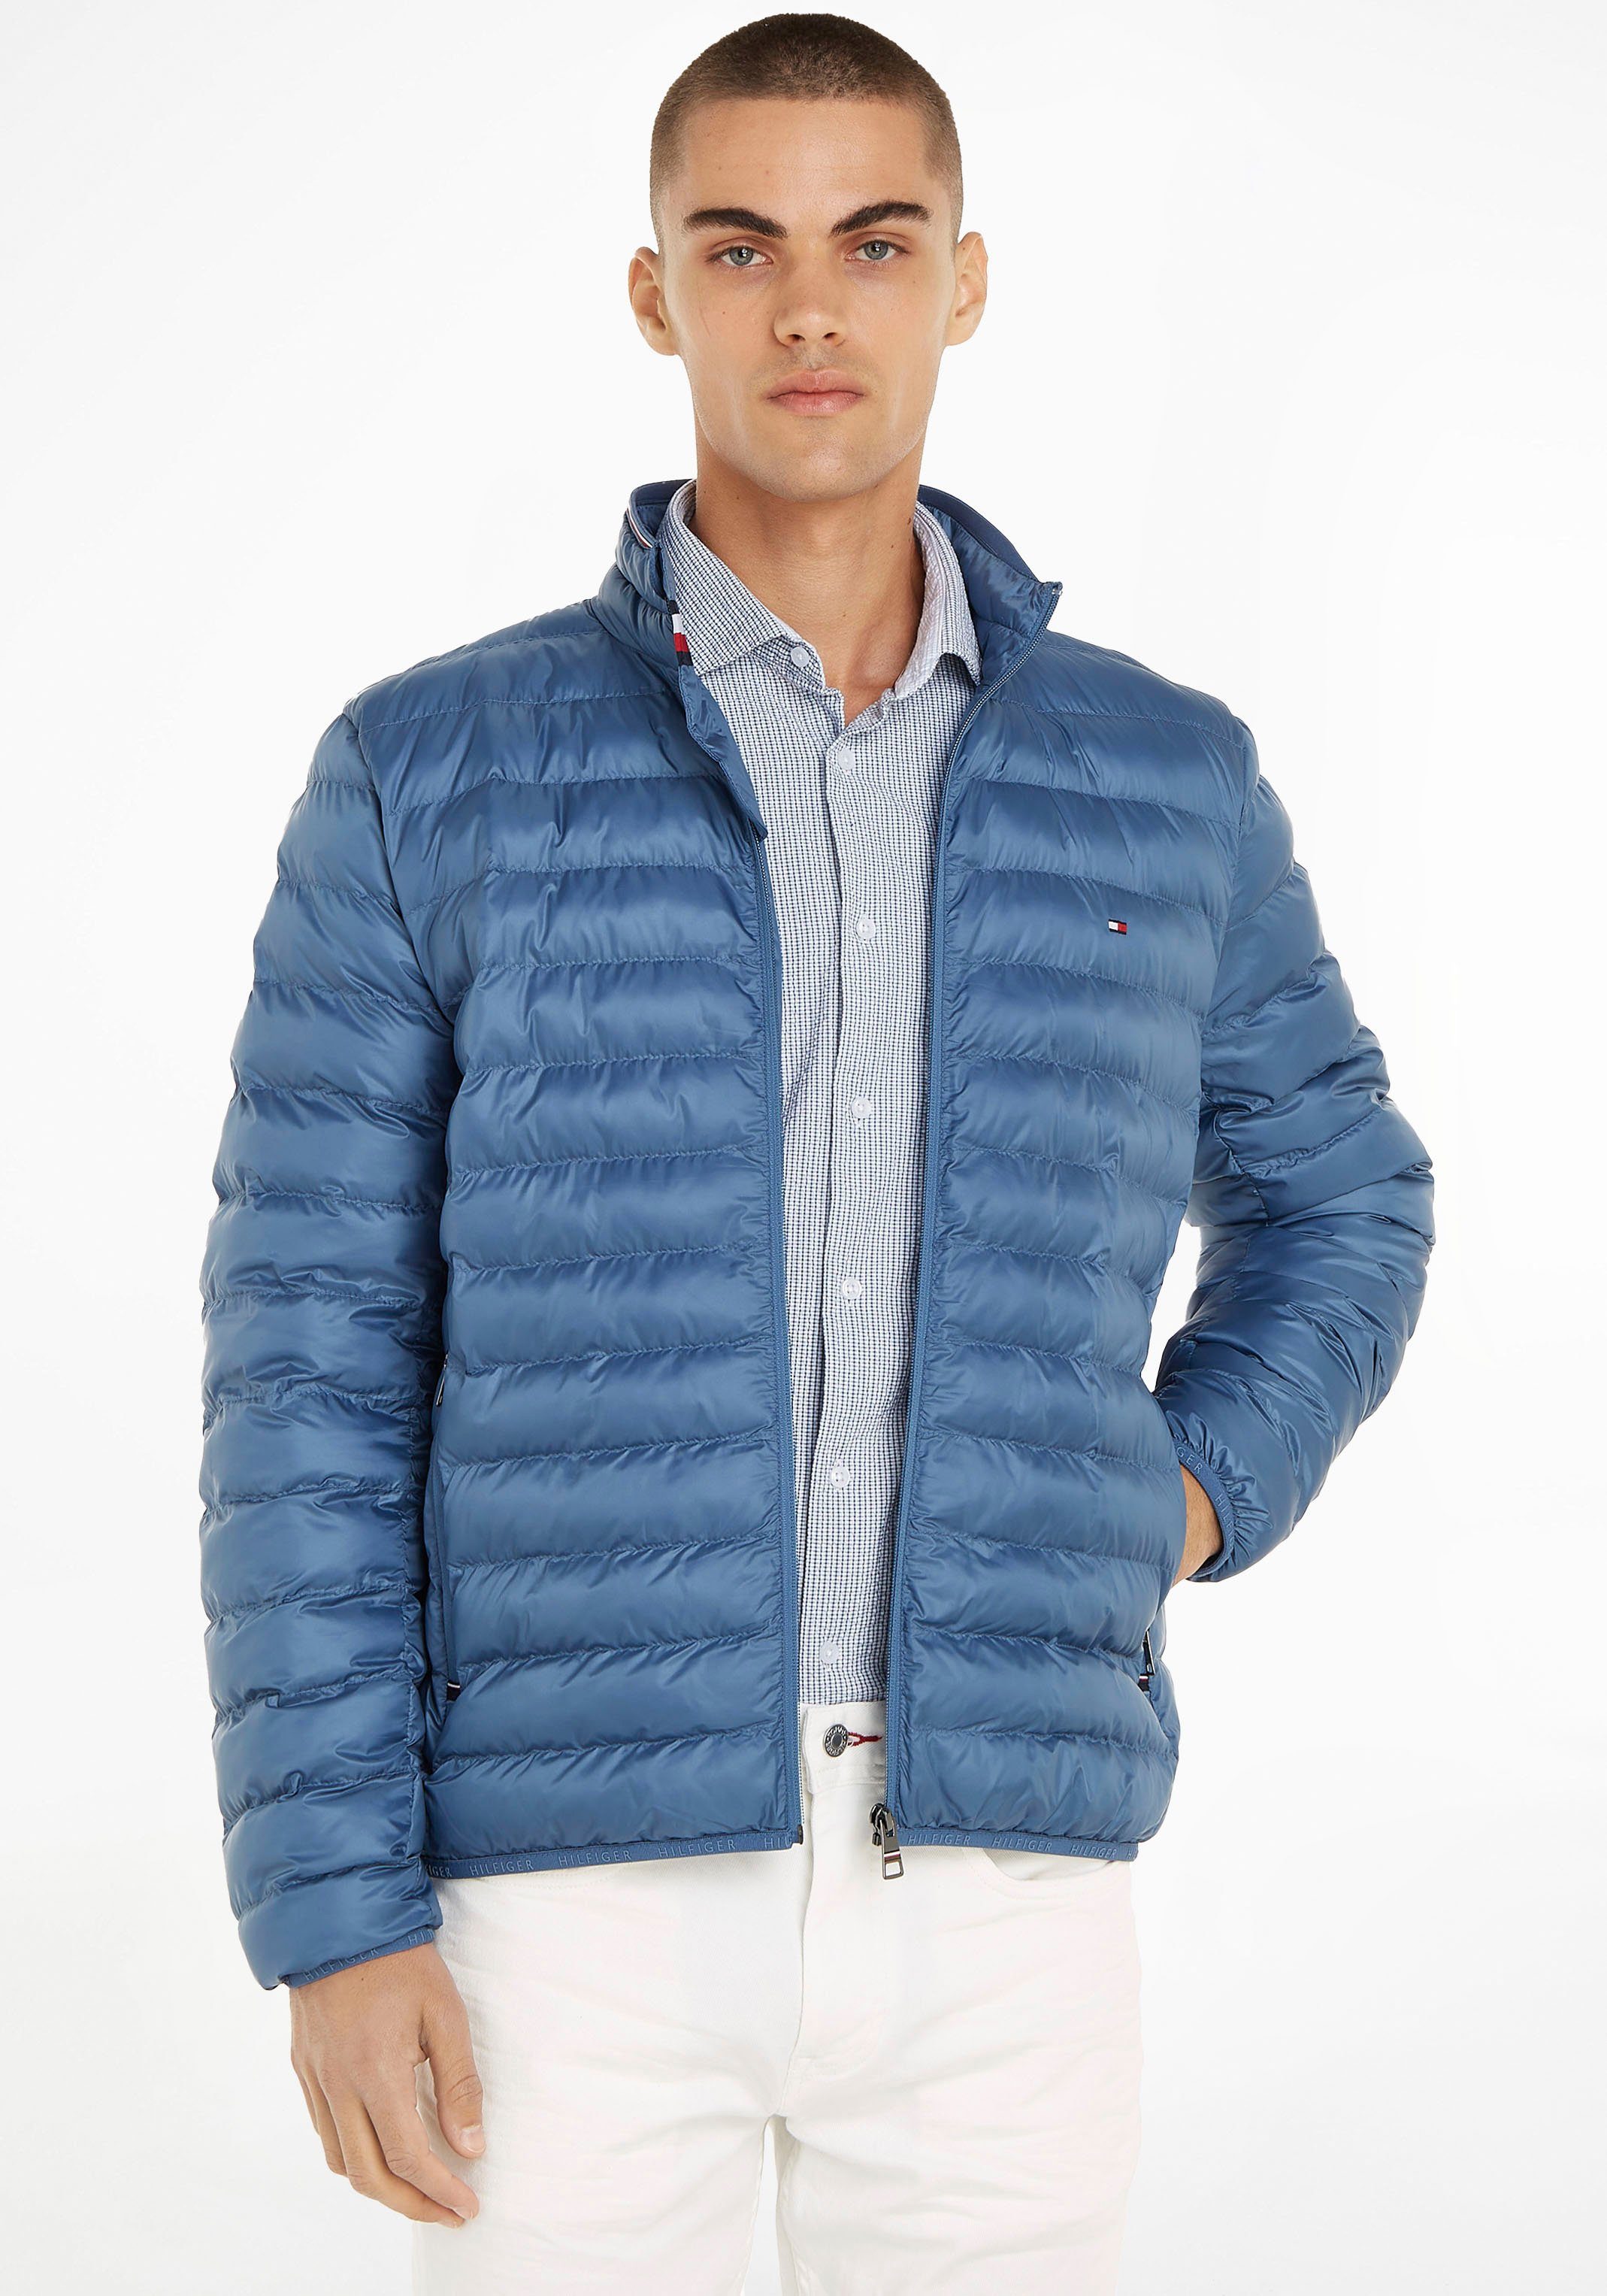 Tommy Hilfiger Steppjacke PACKABLE RECYCLED JACKET mit Tommy Hilfiger Logostickerei Blue Coast